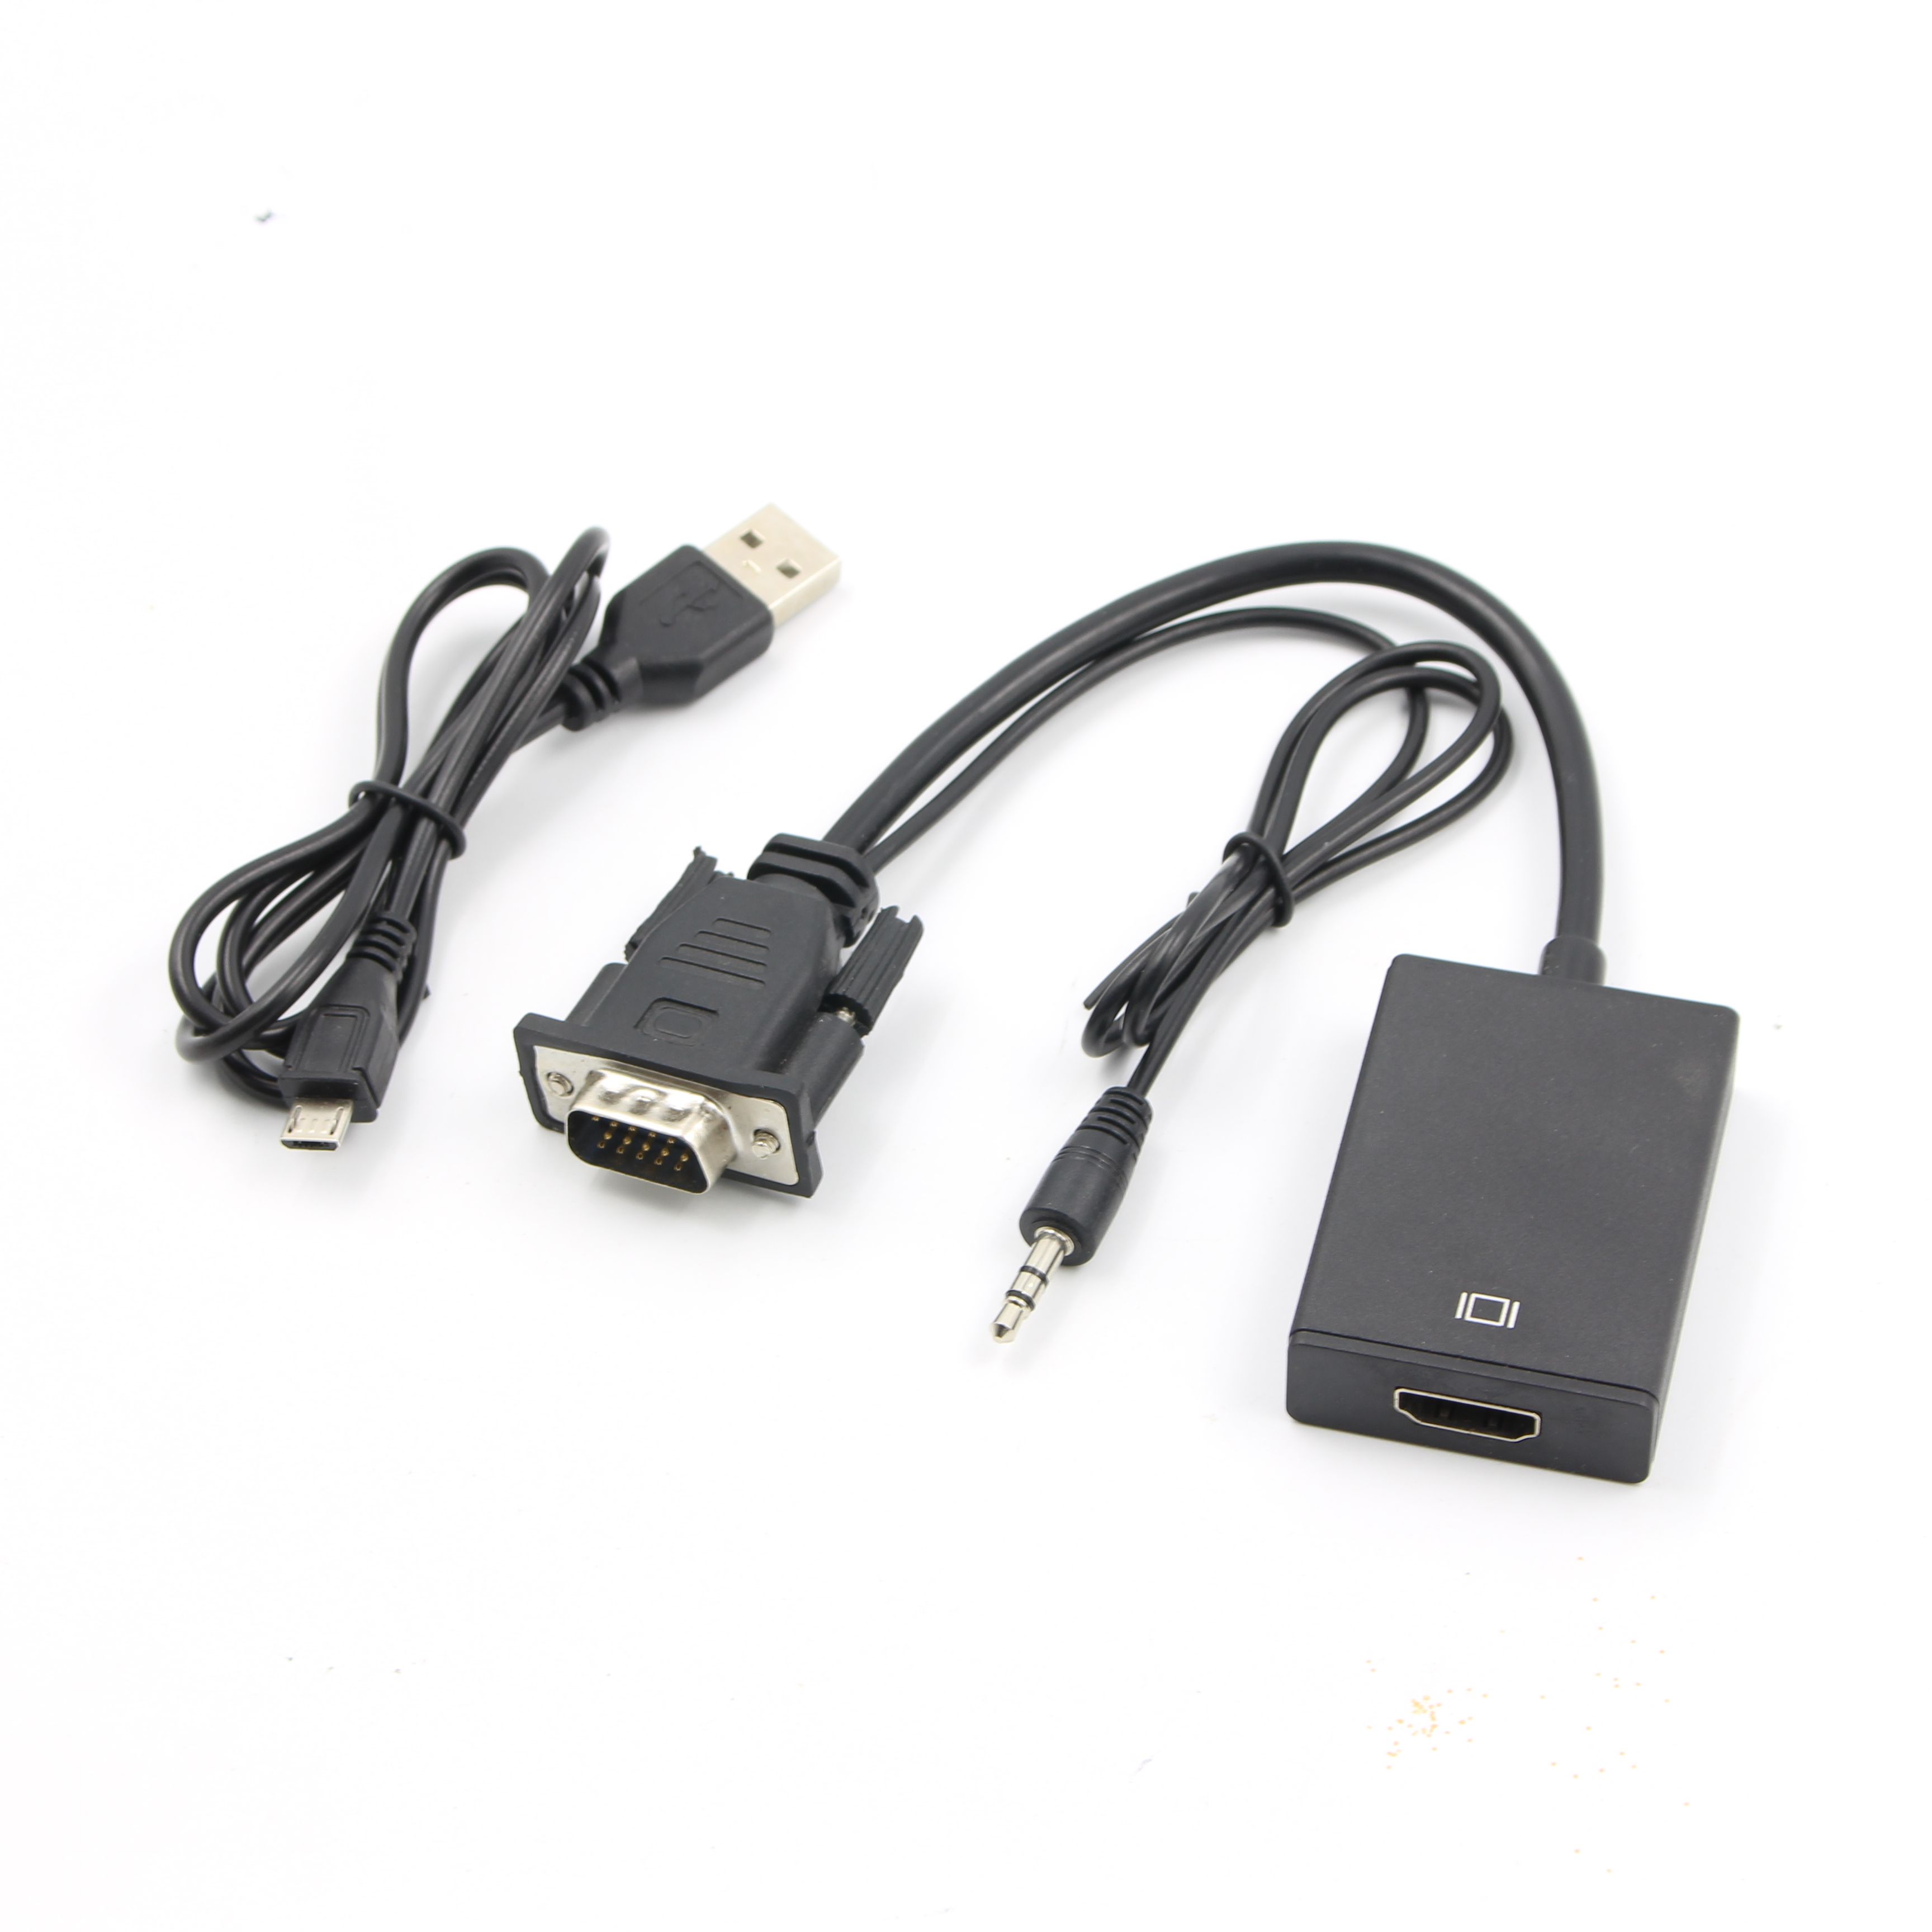 1080P-HD-VGA-To-HDMI-Converter-Adapter-with-Audio-Cable-for-HDTV-PC-Laptop-TV-1743730